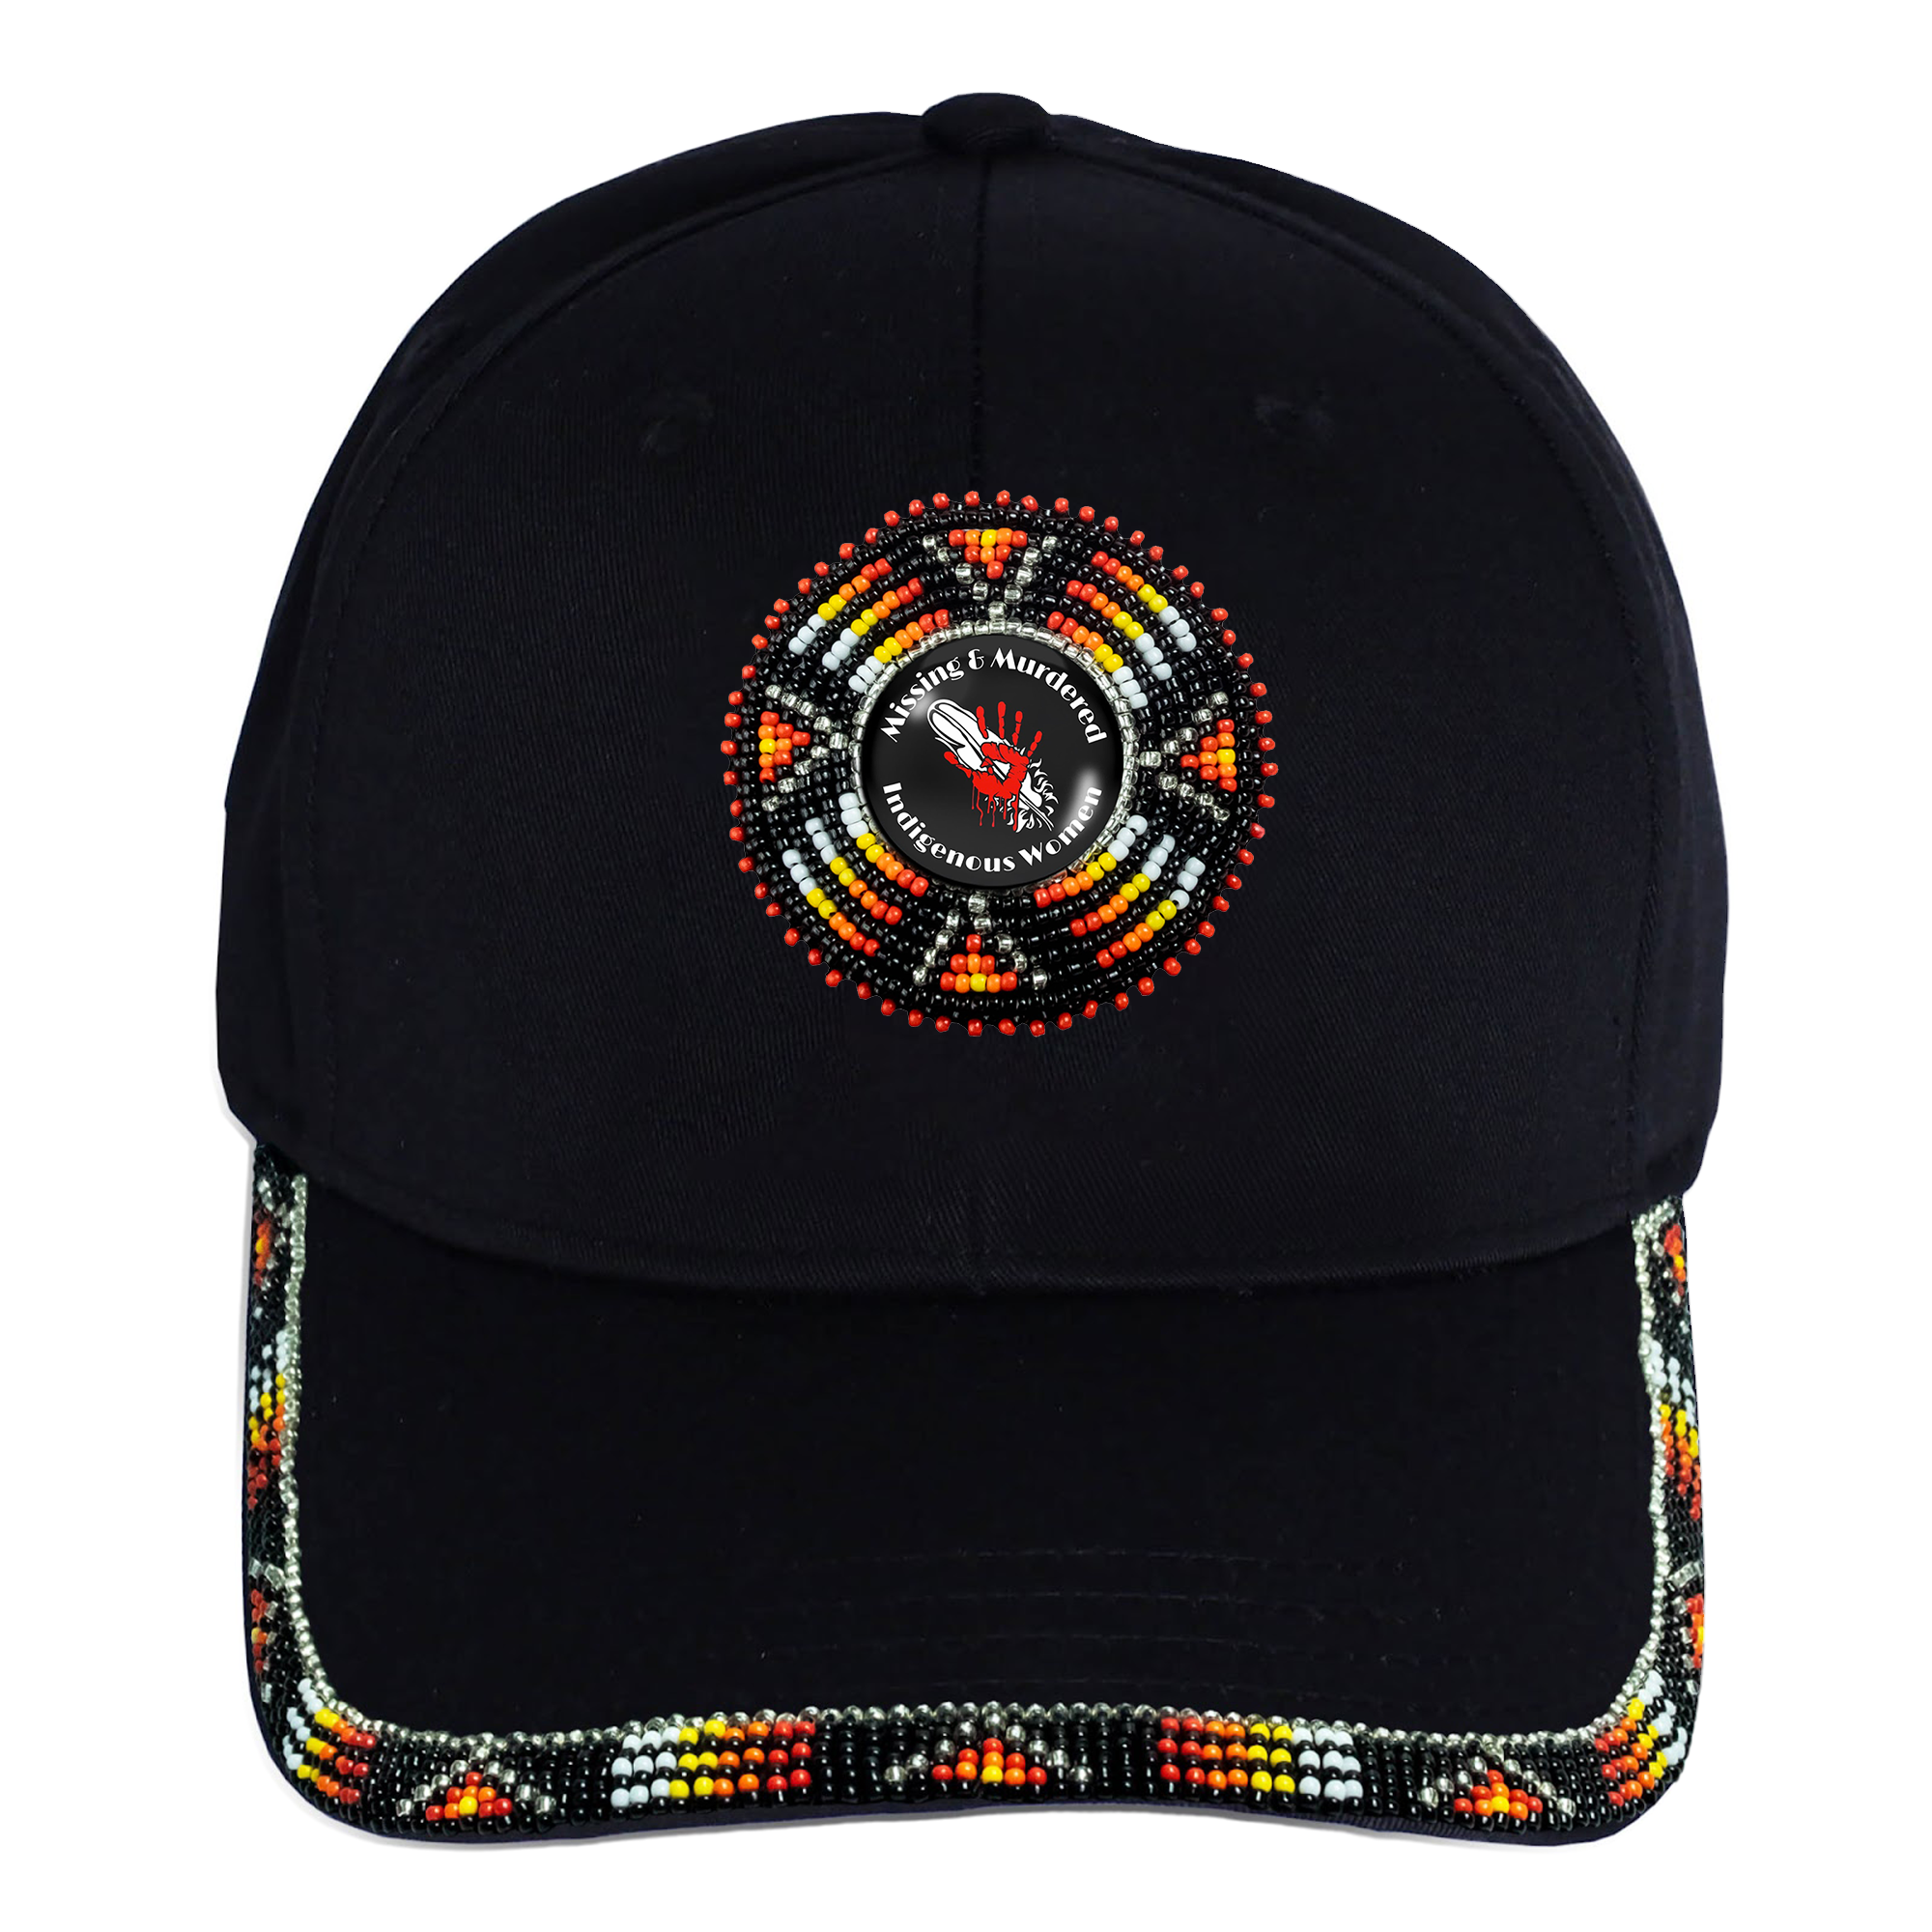 Red Hand Baseball Cap With Patch And A Colorful Beaded Brim Native American Style